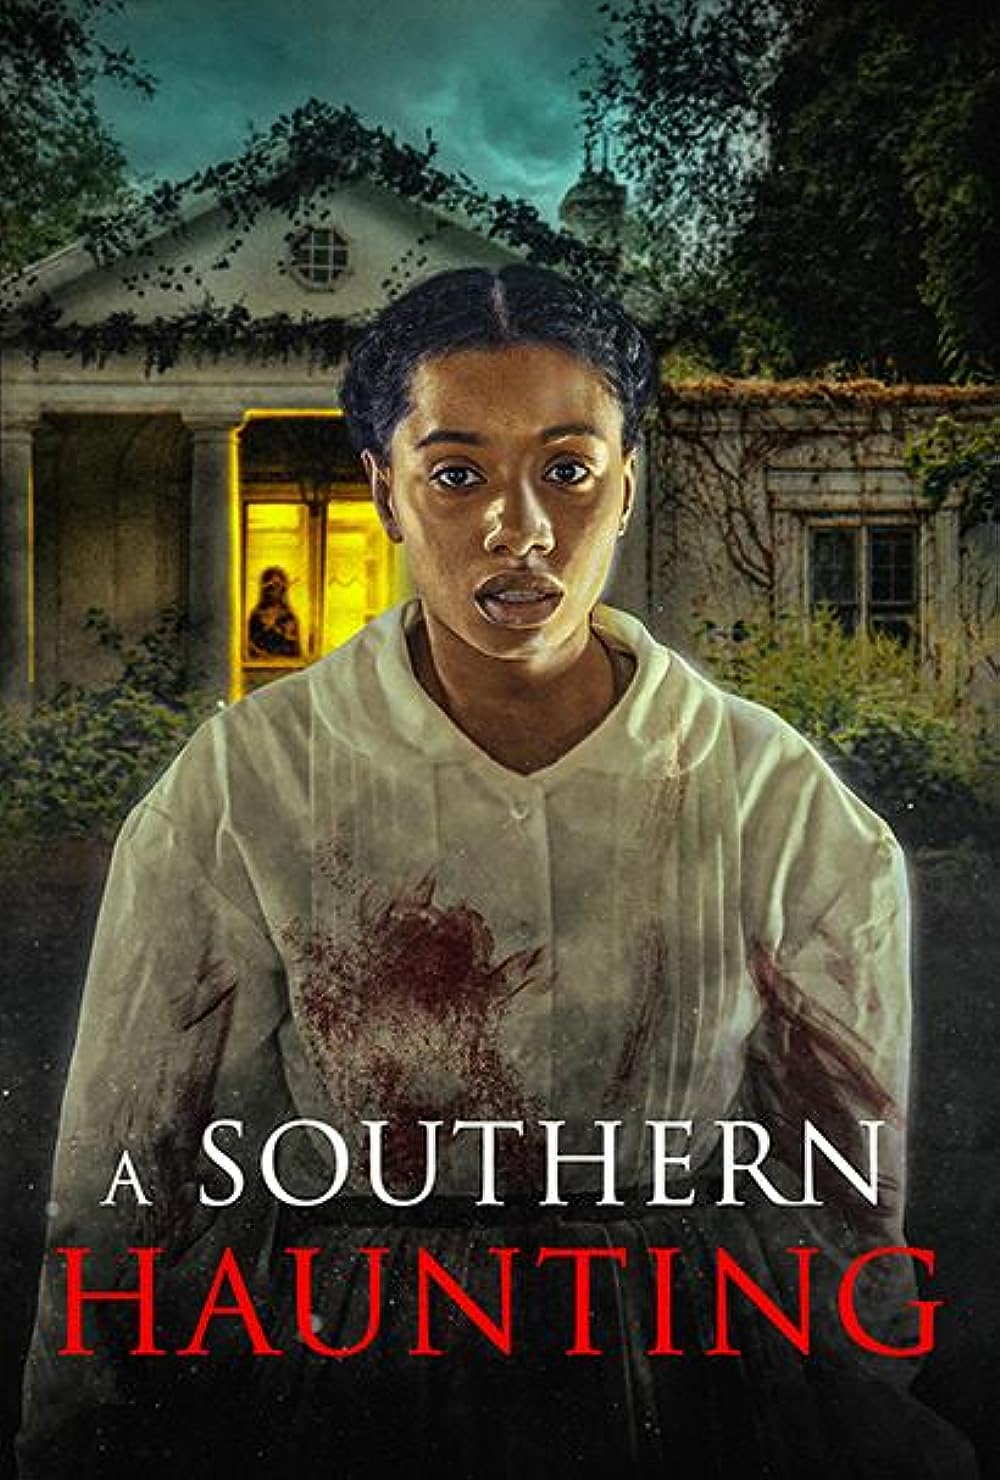 FULL MOVIE: A Southern Haunting (2023)